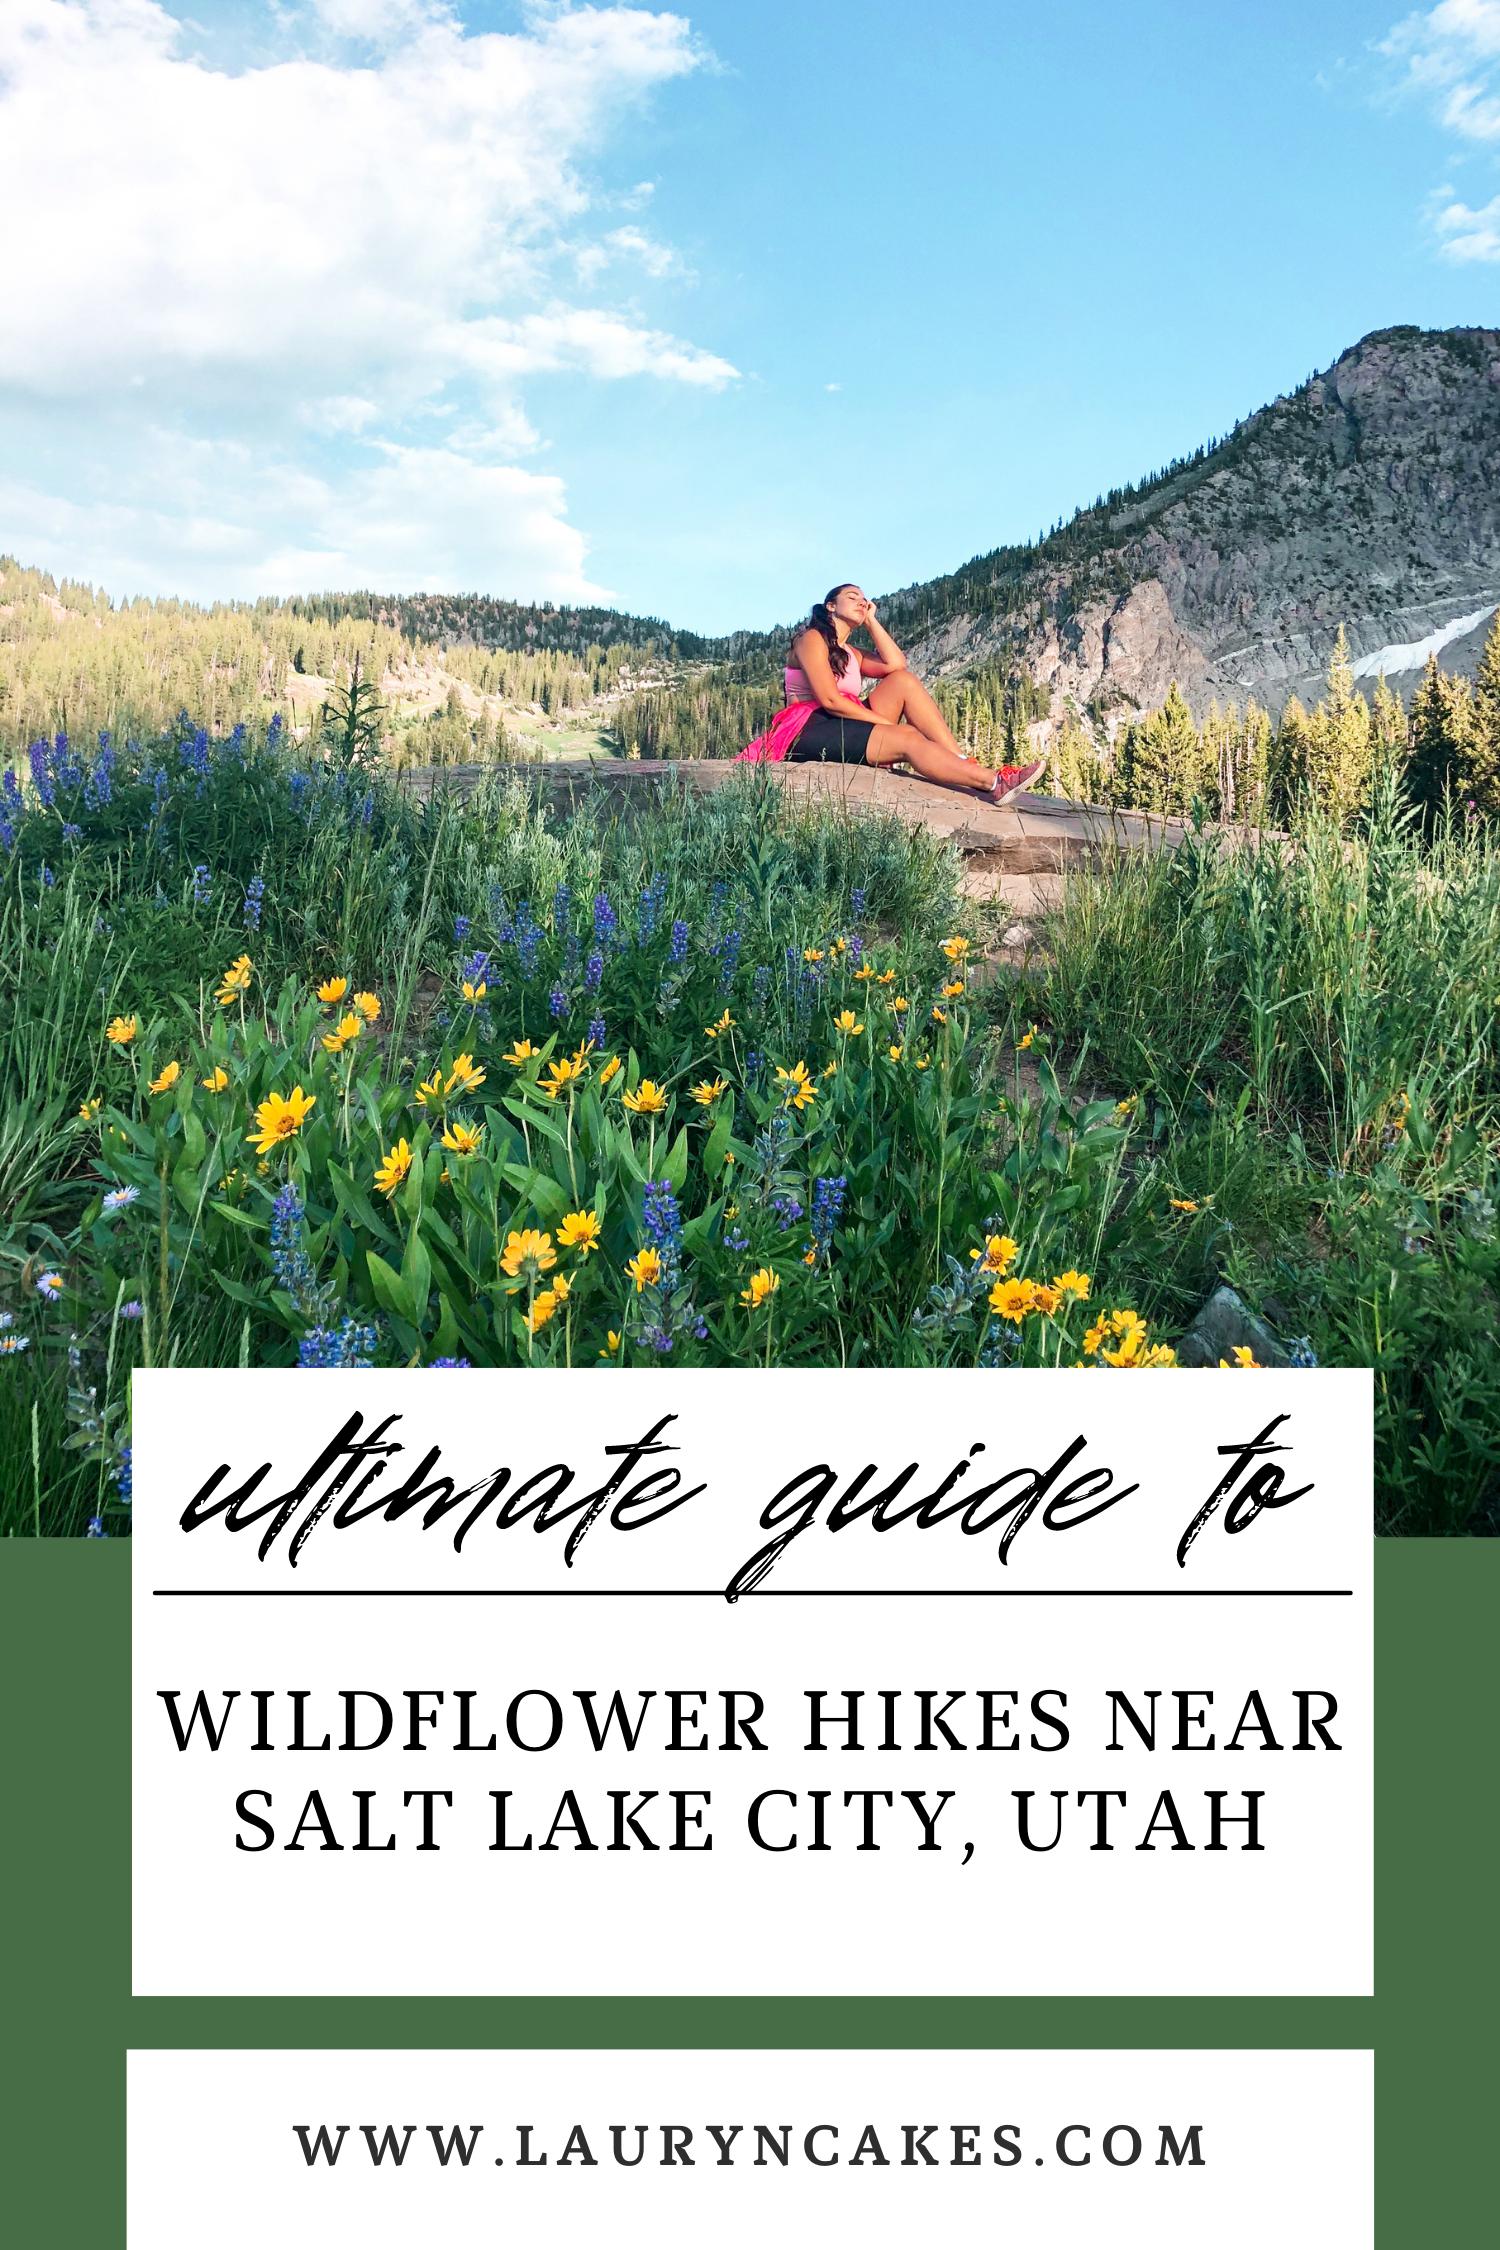 Image has text that says, "ultimate guide to wildflower hikes near salt lake city, Utah" with an image of Lauryn Hock sitting on a rock in a field of grass and flowers in the mountains